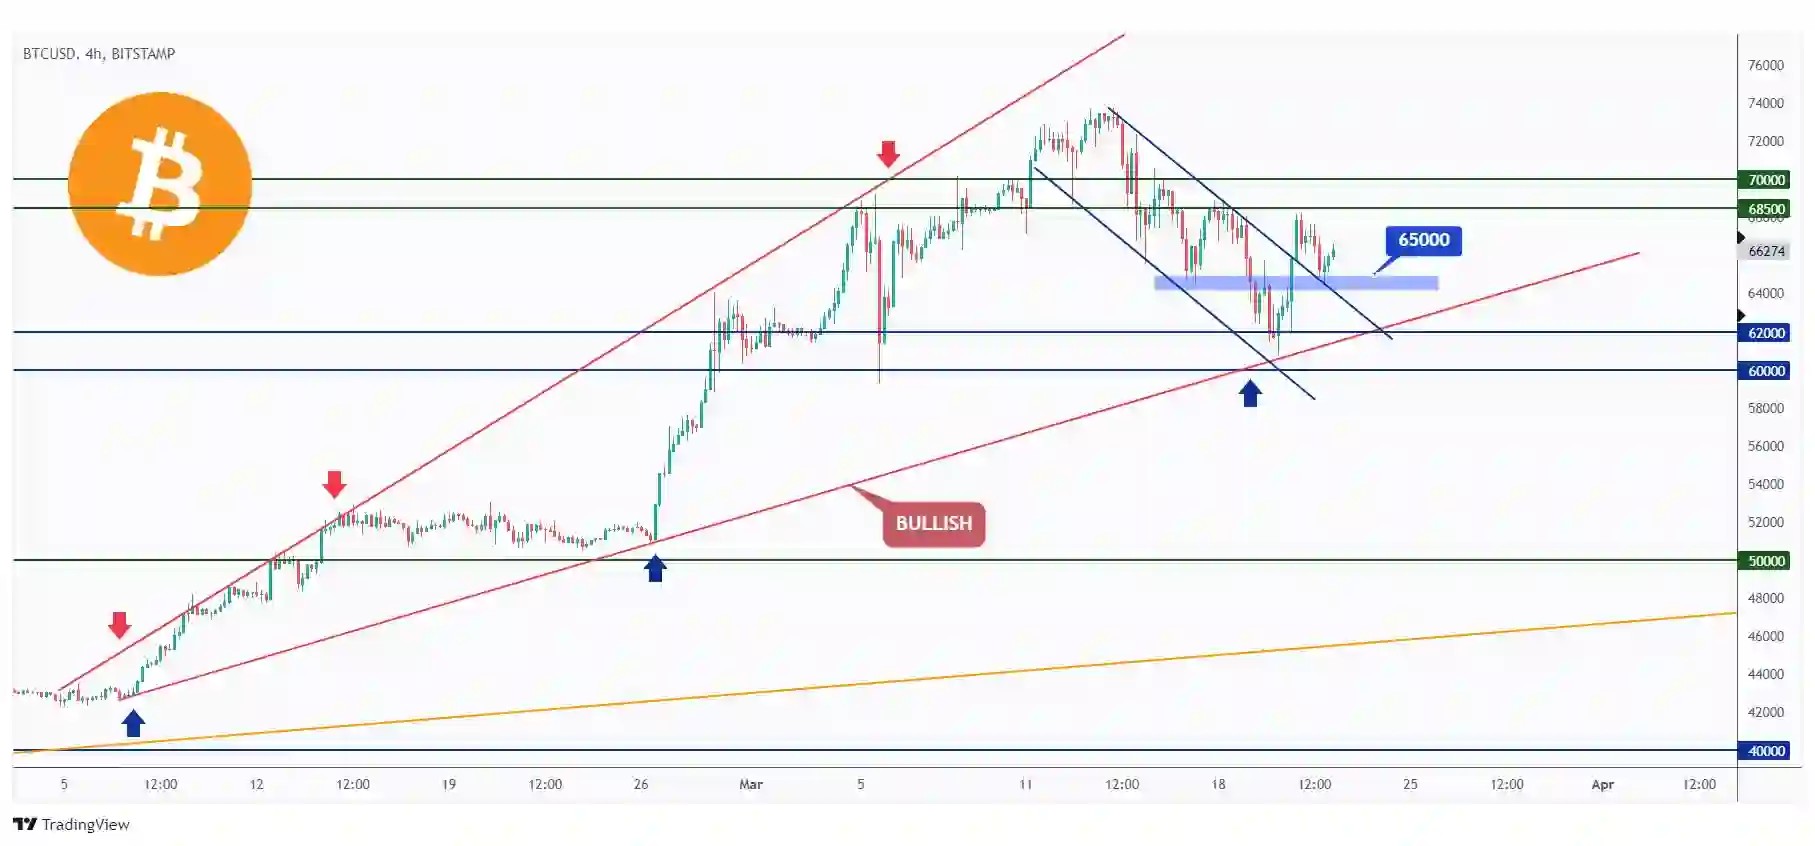 BTC 4h chart overall bullish trading within the rising wedge pattern but hovering with a range between $60,000 and $70,000.